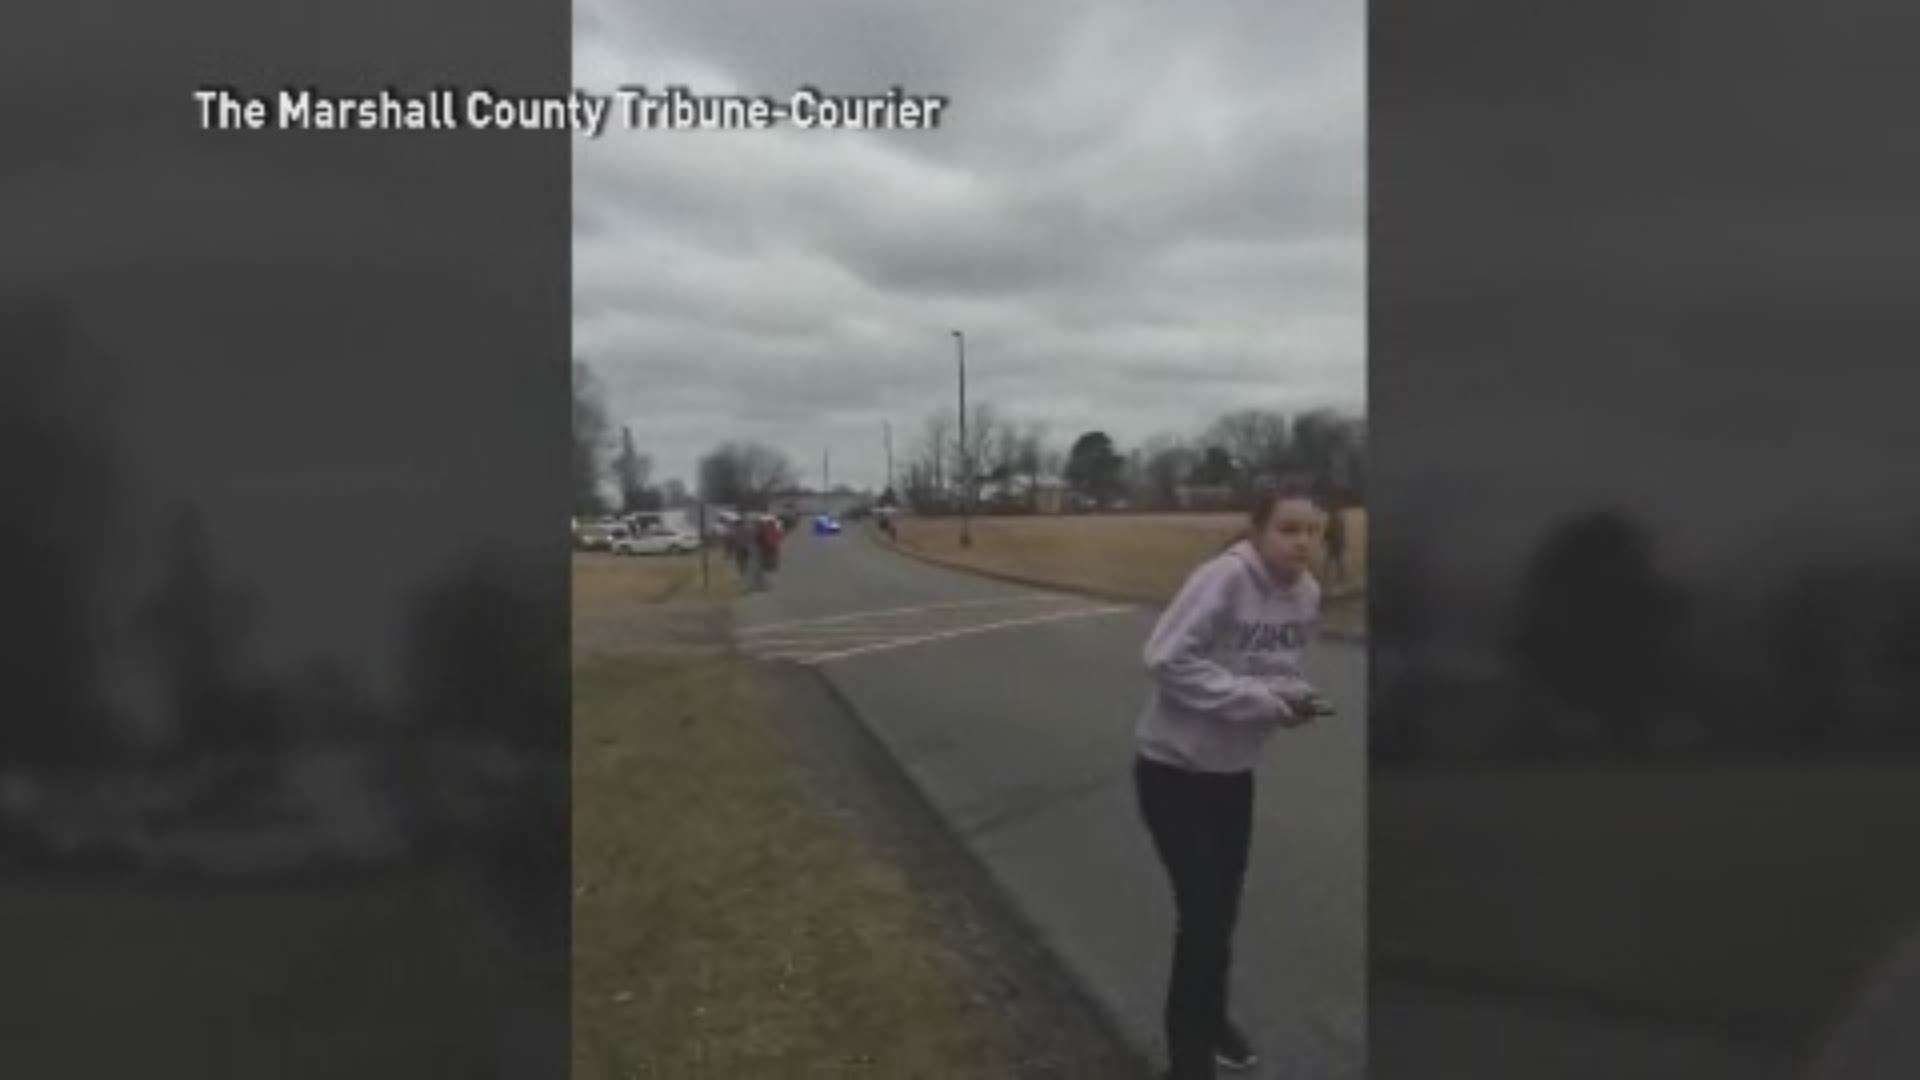 The Marshall County Tribune Courier shared this video from the scene of a school shooting in Marshall County, Ky.